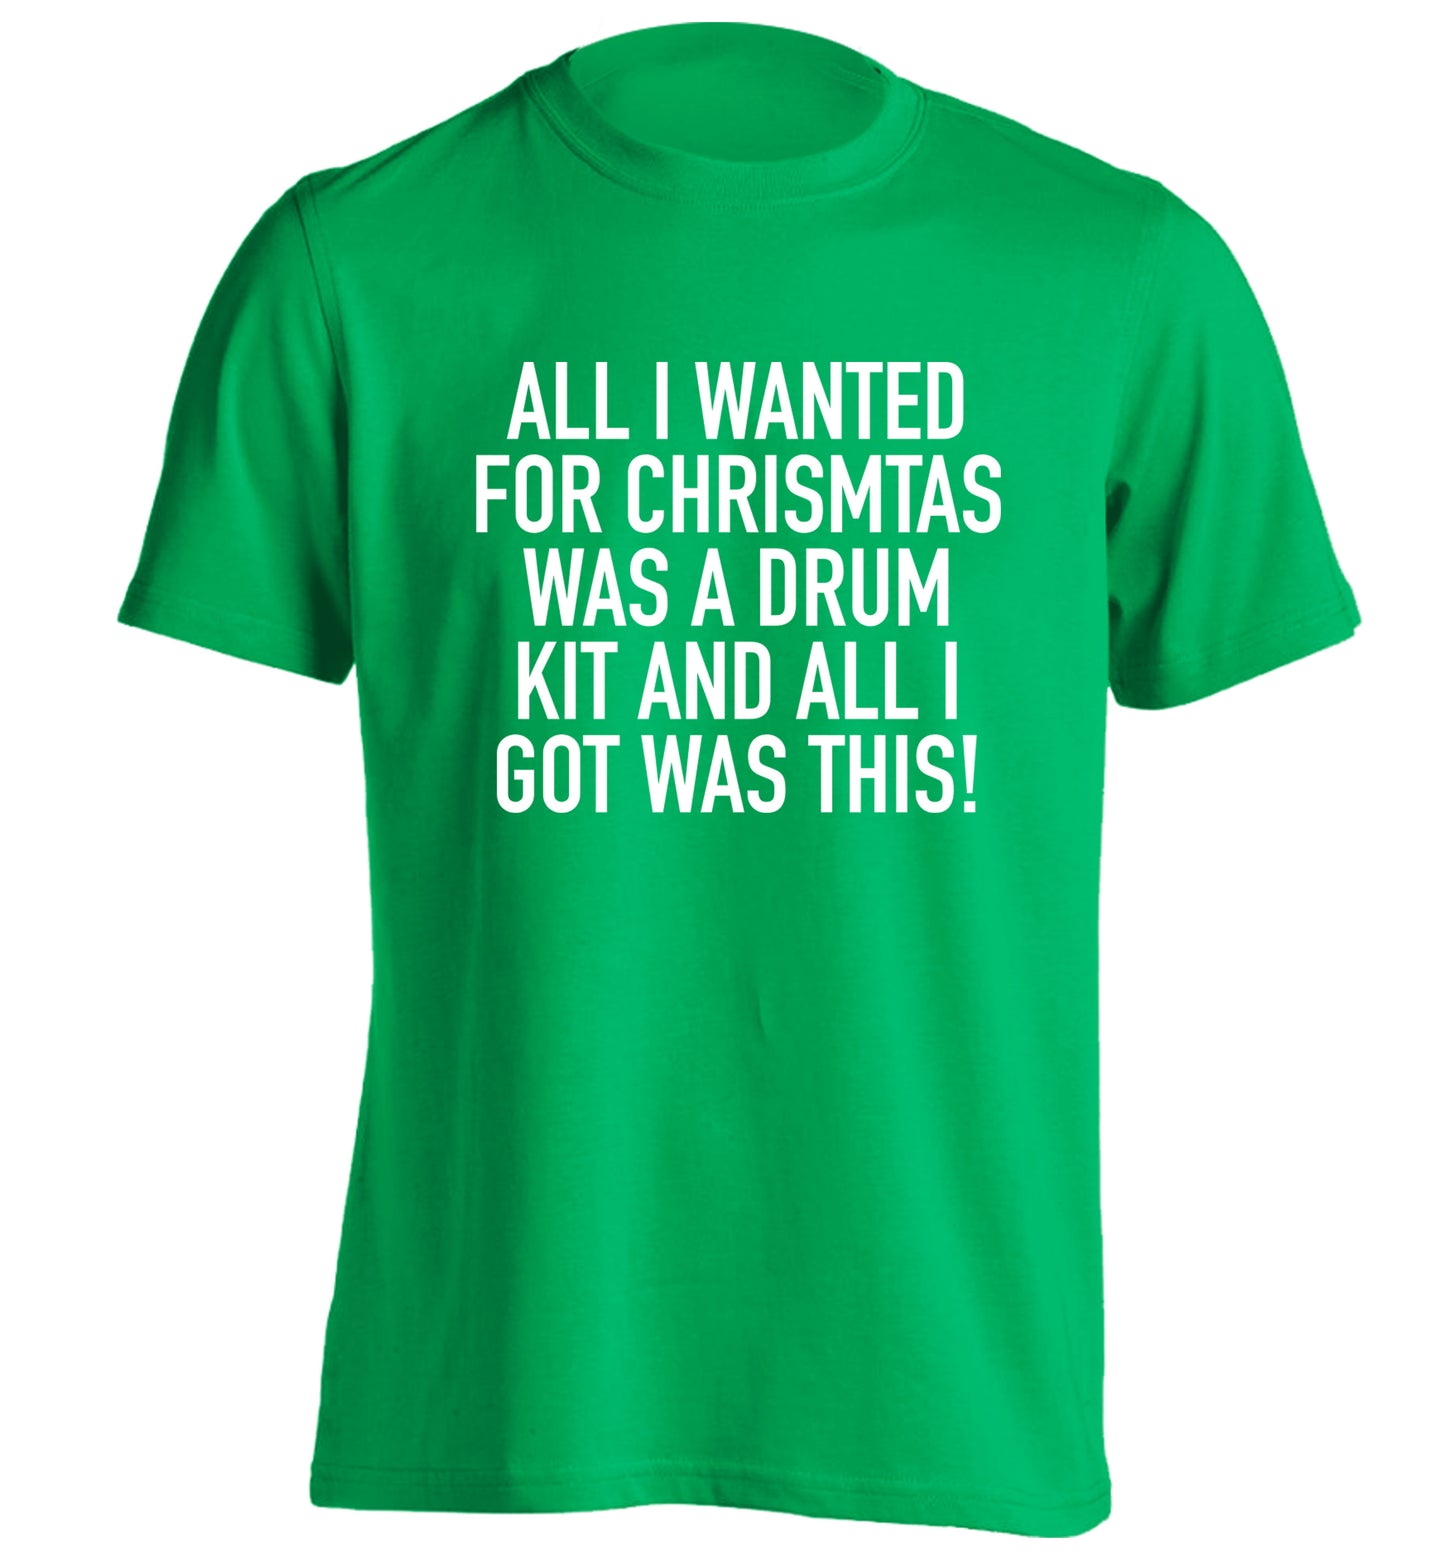 All I wanted for Christmas was a drum kit and all I got was this! adults unisex green Tshirt 2XL